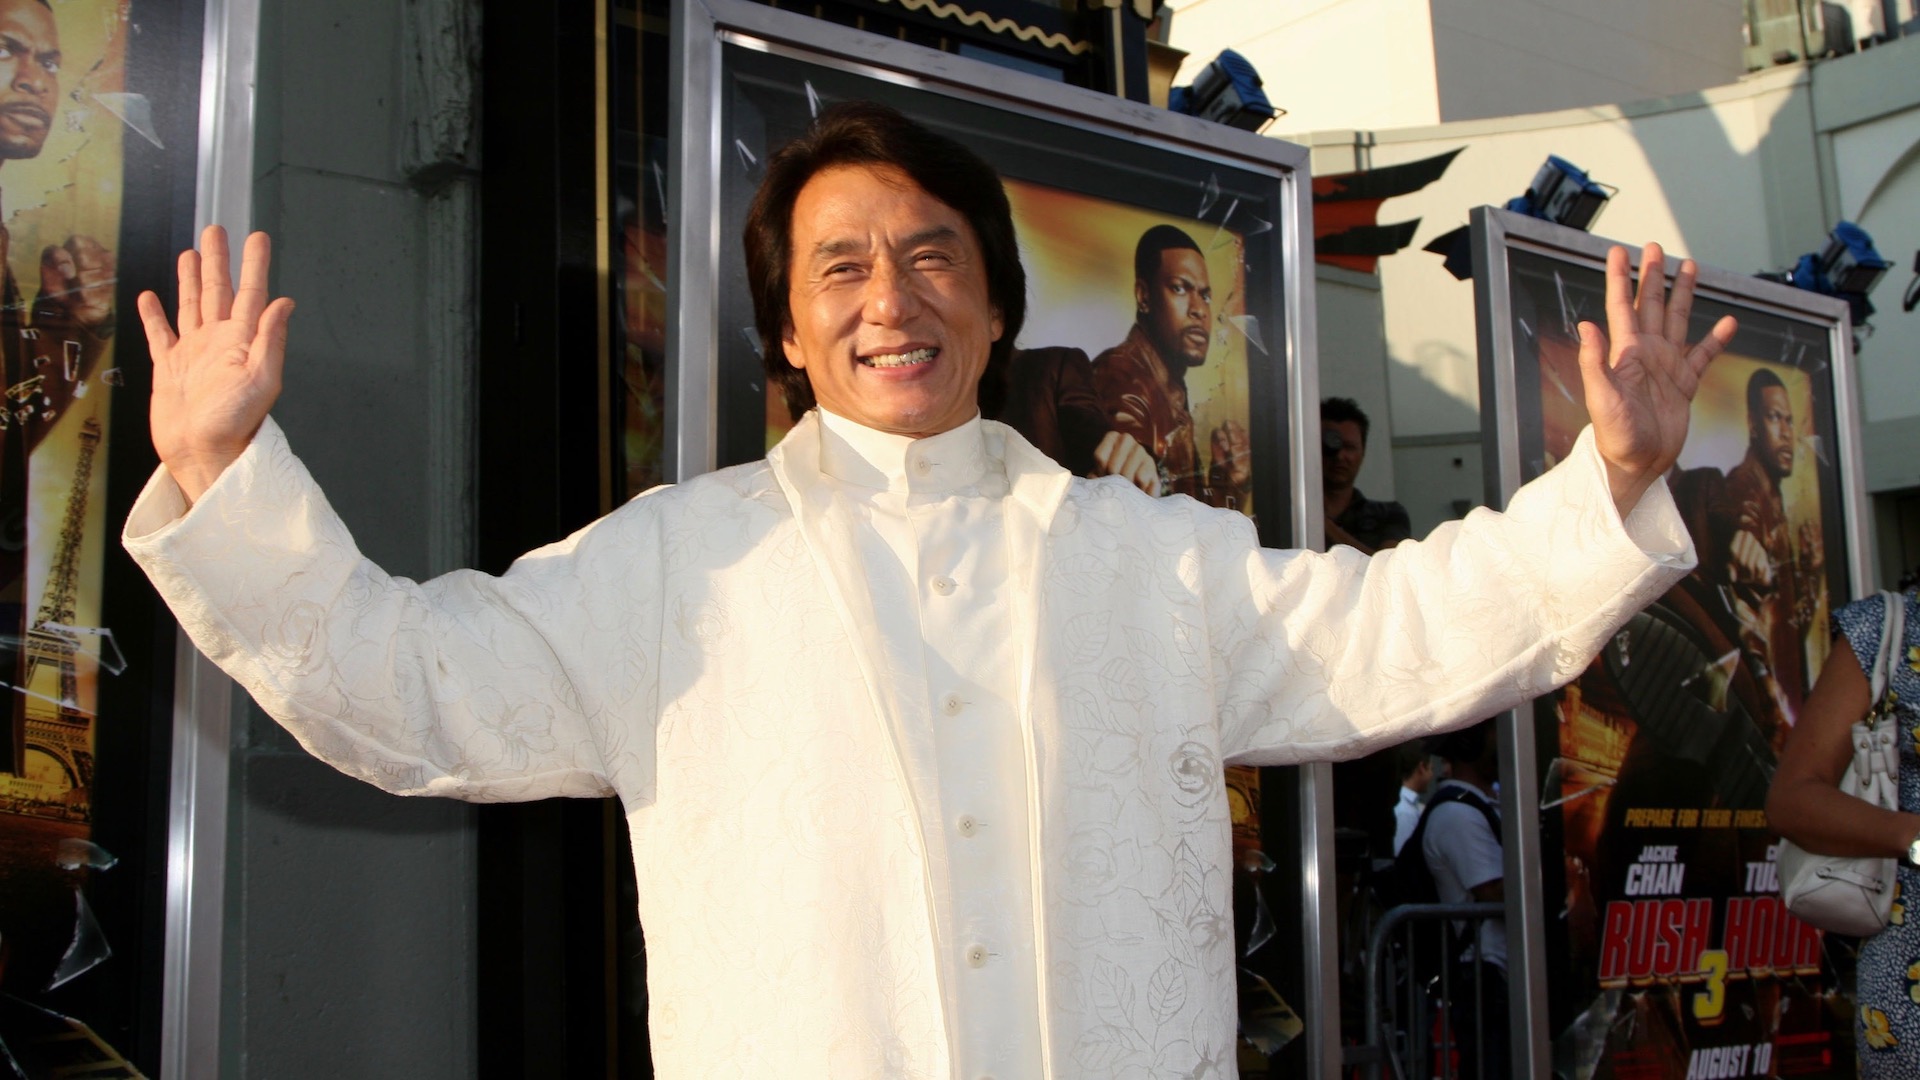 https://img.buzzfeed.com/buzzfeed-static/complex/images/iis0dvfw5cty7jbbq2rb/jackie-chan-confirms-rush-hour-4-is-in-the-works.jpg